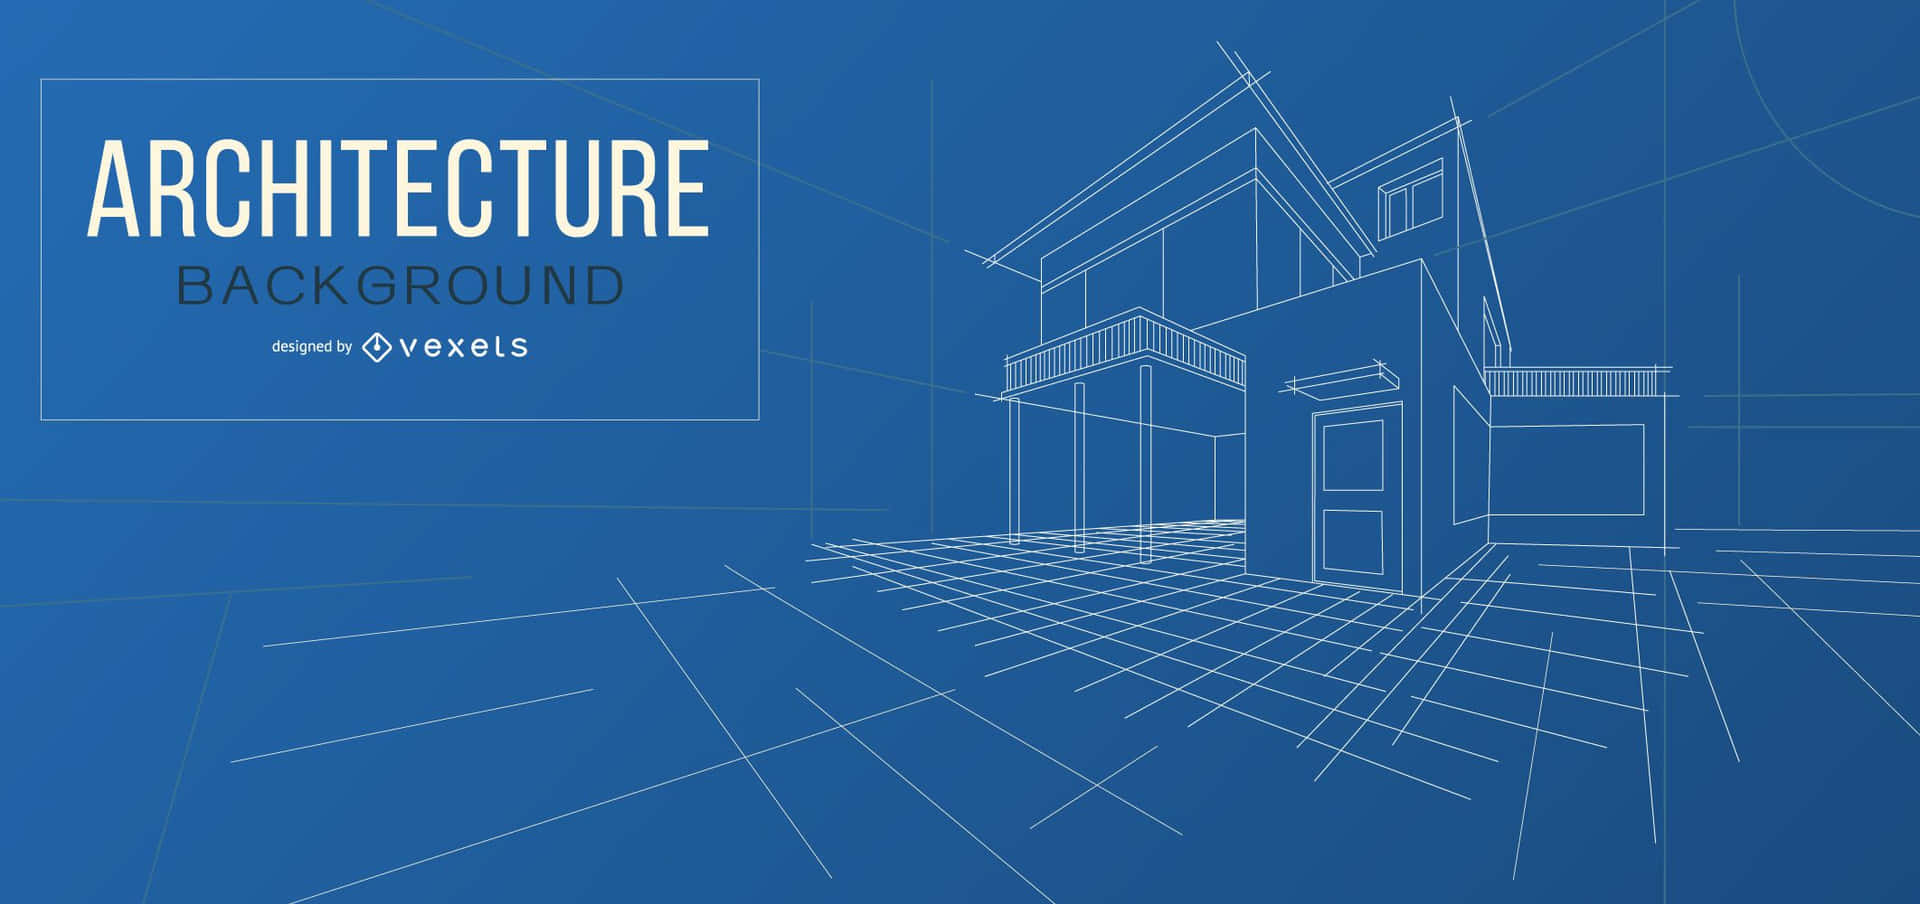 Blueprint Background Architecture Backgrounds By Vexels Wallpaper